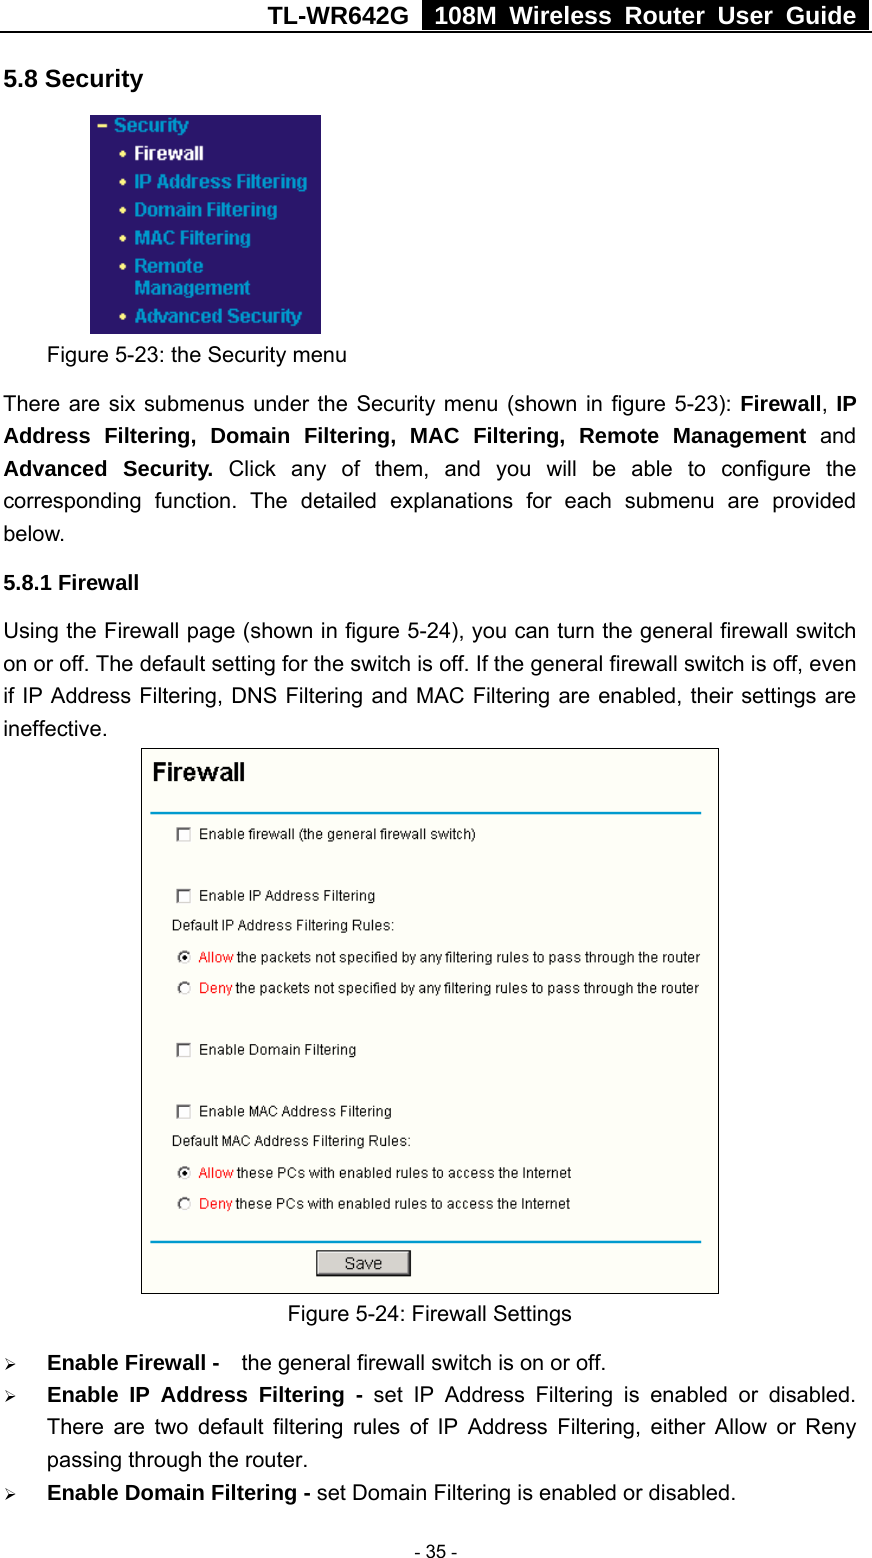 TL-WR642G   108M Wireless Router User Guide   - 35 - 5.8 Security  Figure 5-23: the Security menu There are six submenus under the Security menu (shown in figure 5-23): Firewall, IP Address Filtering, Domain Filtering, MAC Filtering, Remote Management and Advanced Security. Click any of them, and you will be able to configure the corresponding function. The detailed explanations for each submenu are provided below. 5.8.1 Firewall Using the Firewall page (shown in figure 5-24), you can turn the general firewall switch on or off. The default setting for the switch is off. If the general firewall switch is off, even if IP Address Filtering, DNS Filtering and MAC Filtering are enabled, their settings are ineffective.  Figure 5-24: Firewall Settings ¾ Enable Firewall -    the general firewall switch is on or off. ¾ Enable IP Address Filtering - set IP Address Filtering is enabled or disabled. There are two default filtering rules of IP Address Filtering, either Allow or Reny passing through the router. ¾ Enable Domain Filtering - set Domain Filtering is enabled or disabled. 